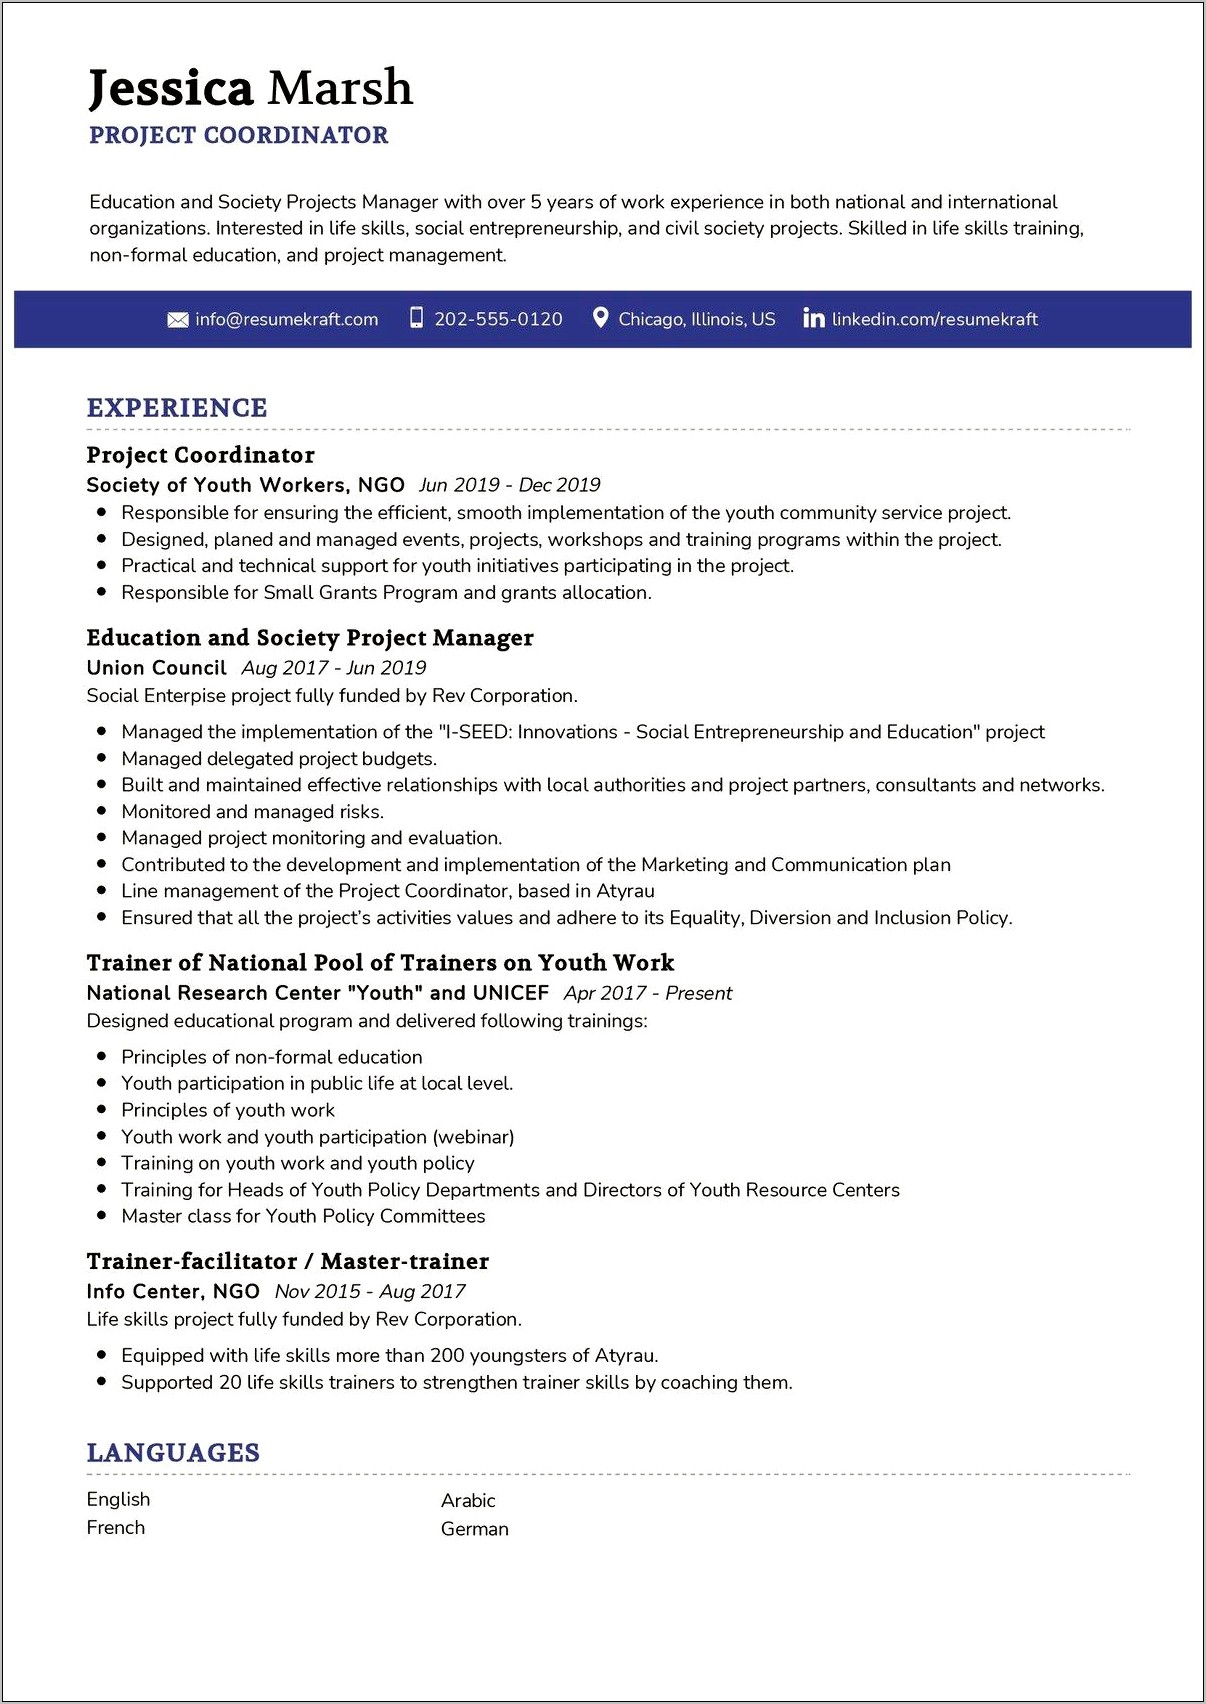 Examples Of Resumes For Project Coordinators